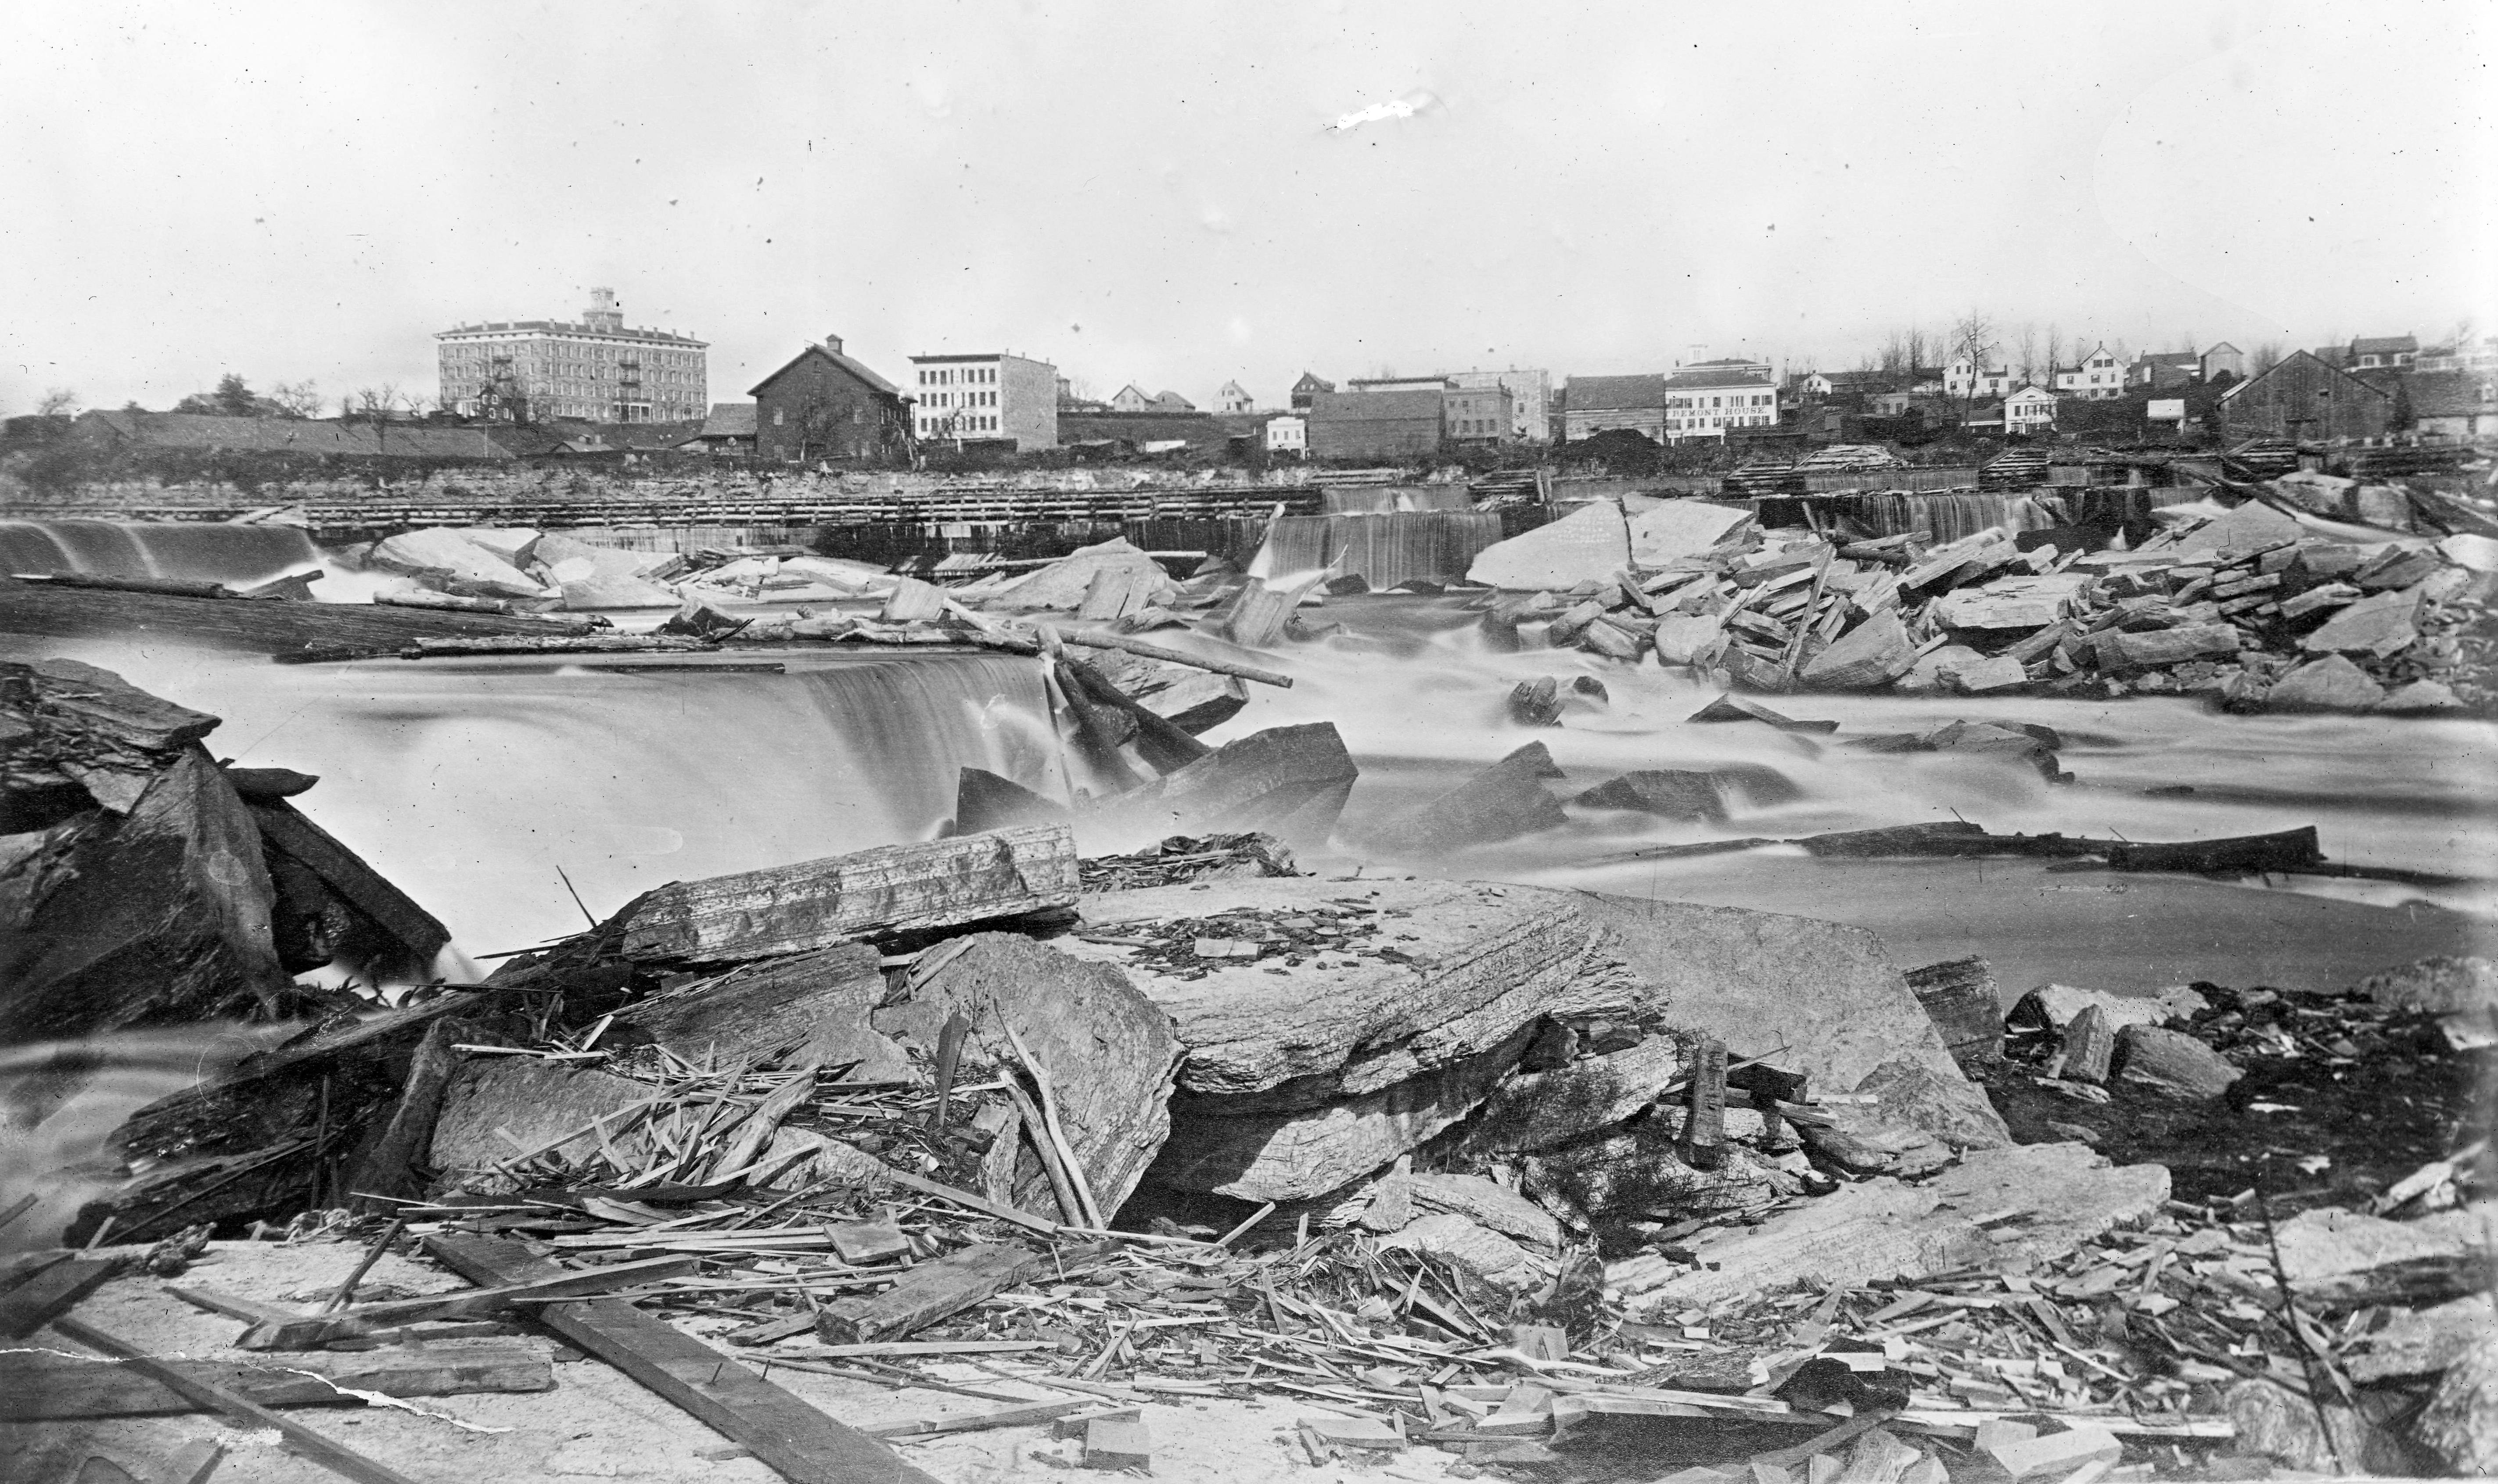 St. Anthony Falls in 1863, prior to the Eastman disaster and construction of a spillway. Sandstone erosion left chunks of broken limestone in the Mississippi River.